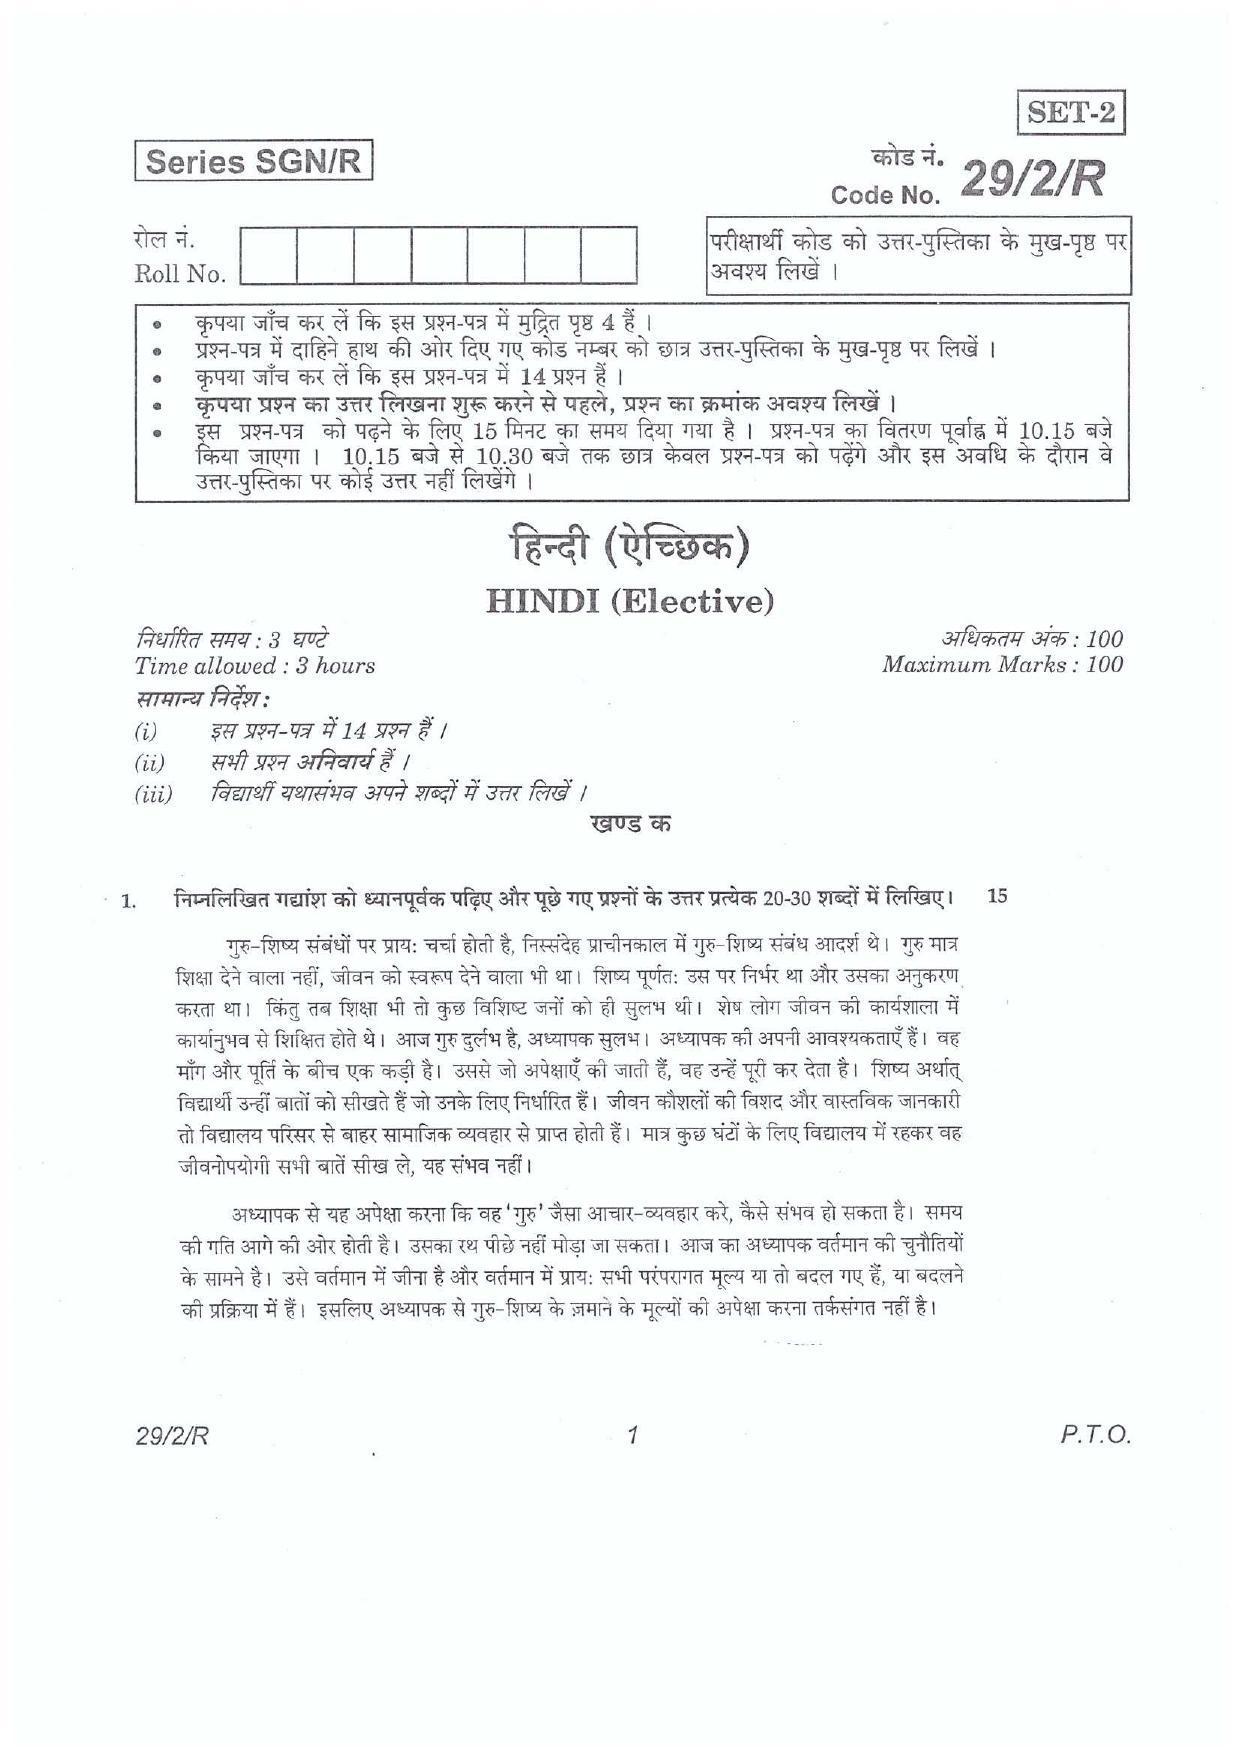 CBSE Class 12 29-2R  HINDI ELECTIVE (SGN) 2018 Question Paper - Page 1